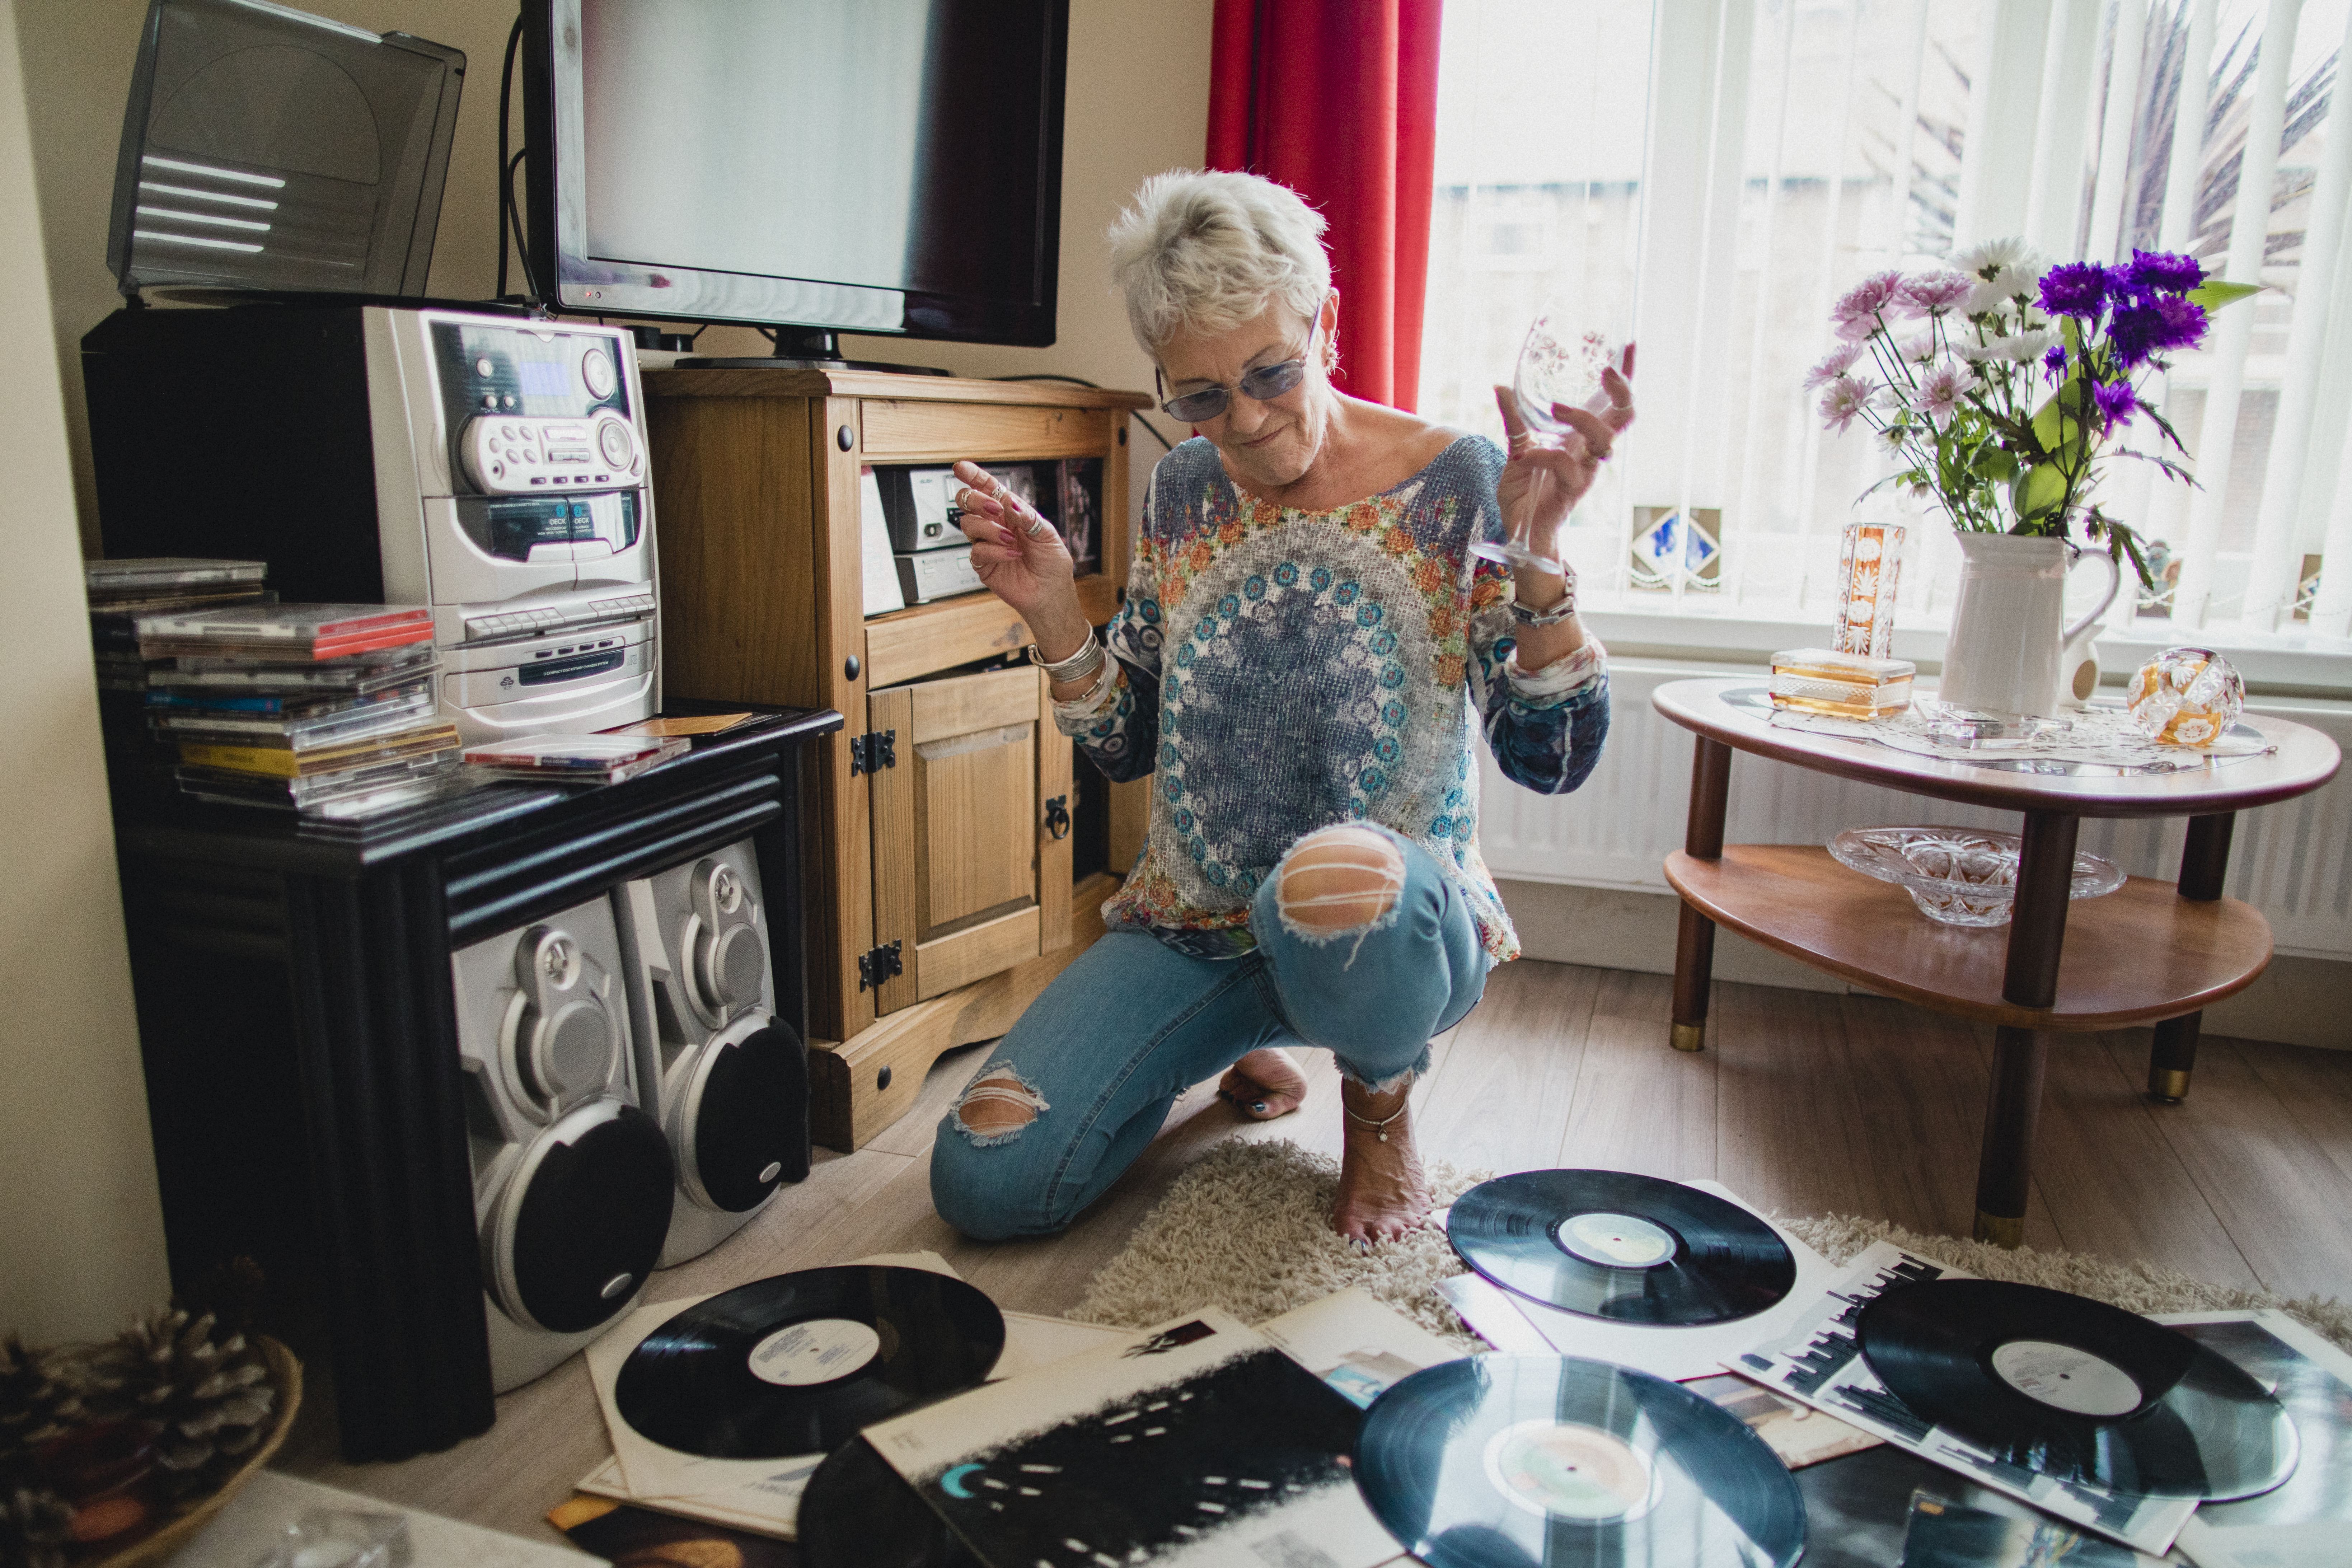 One senior woman sitting on the floor in her living room, she is surrounded by vinyl records and is listening to music from a record player.